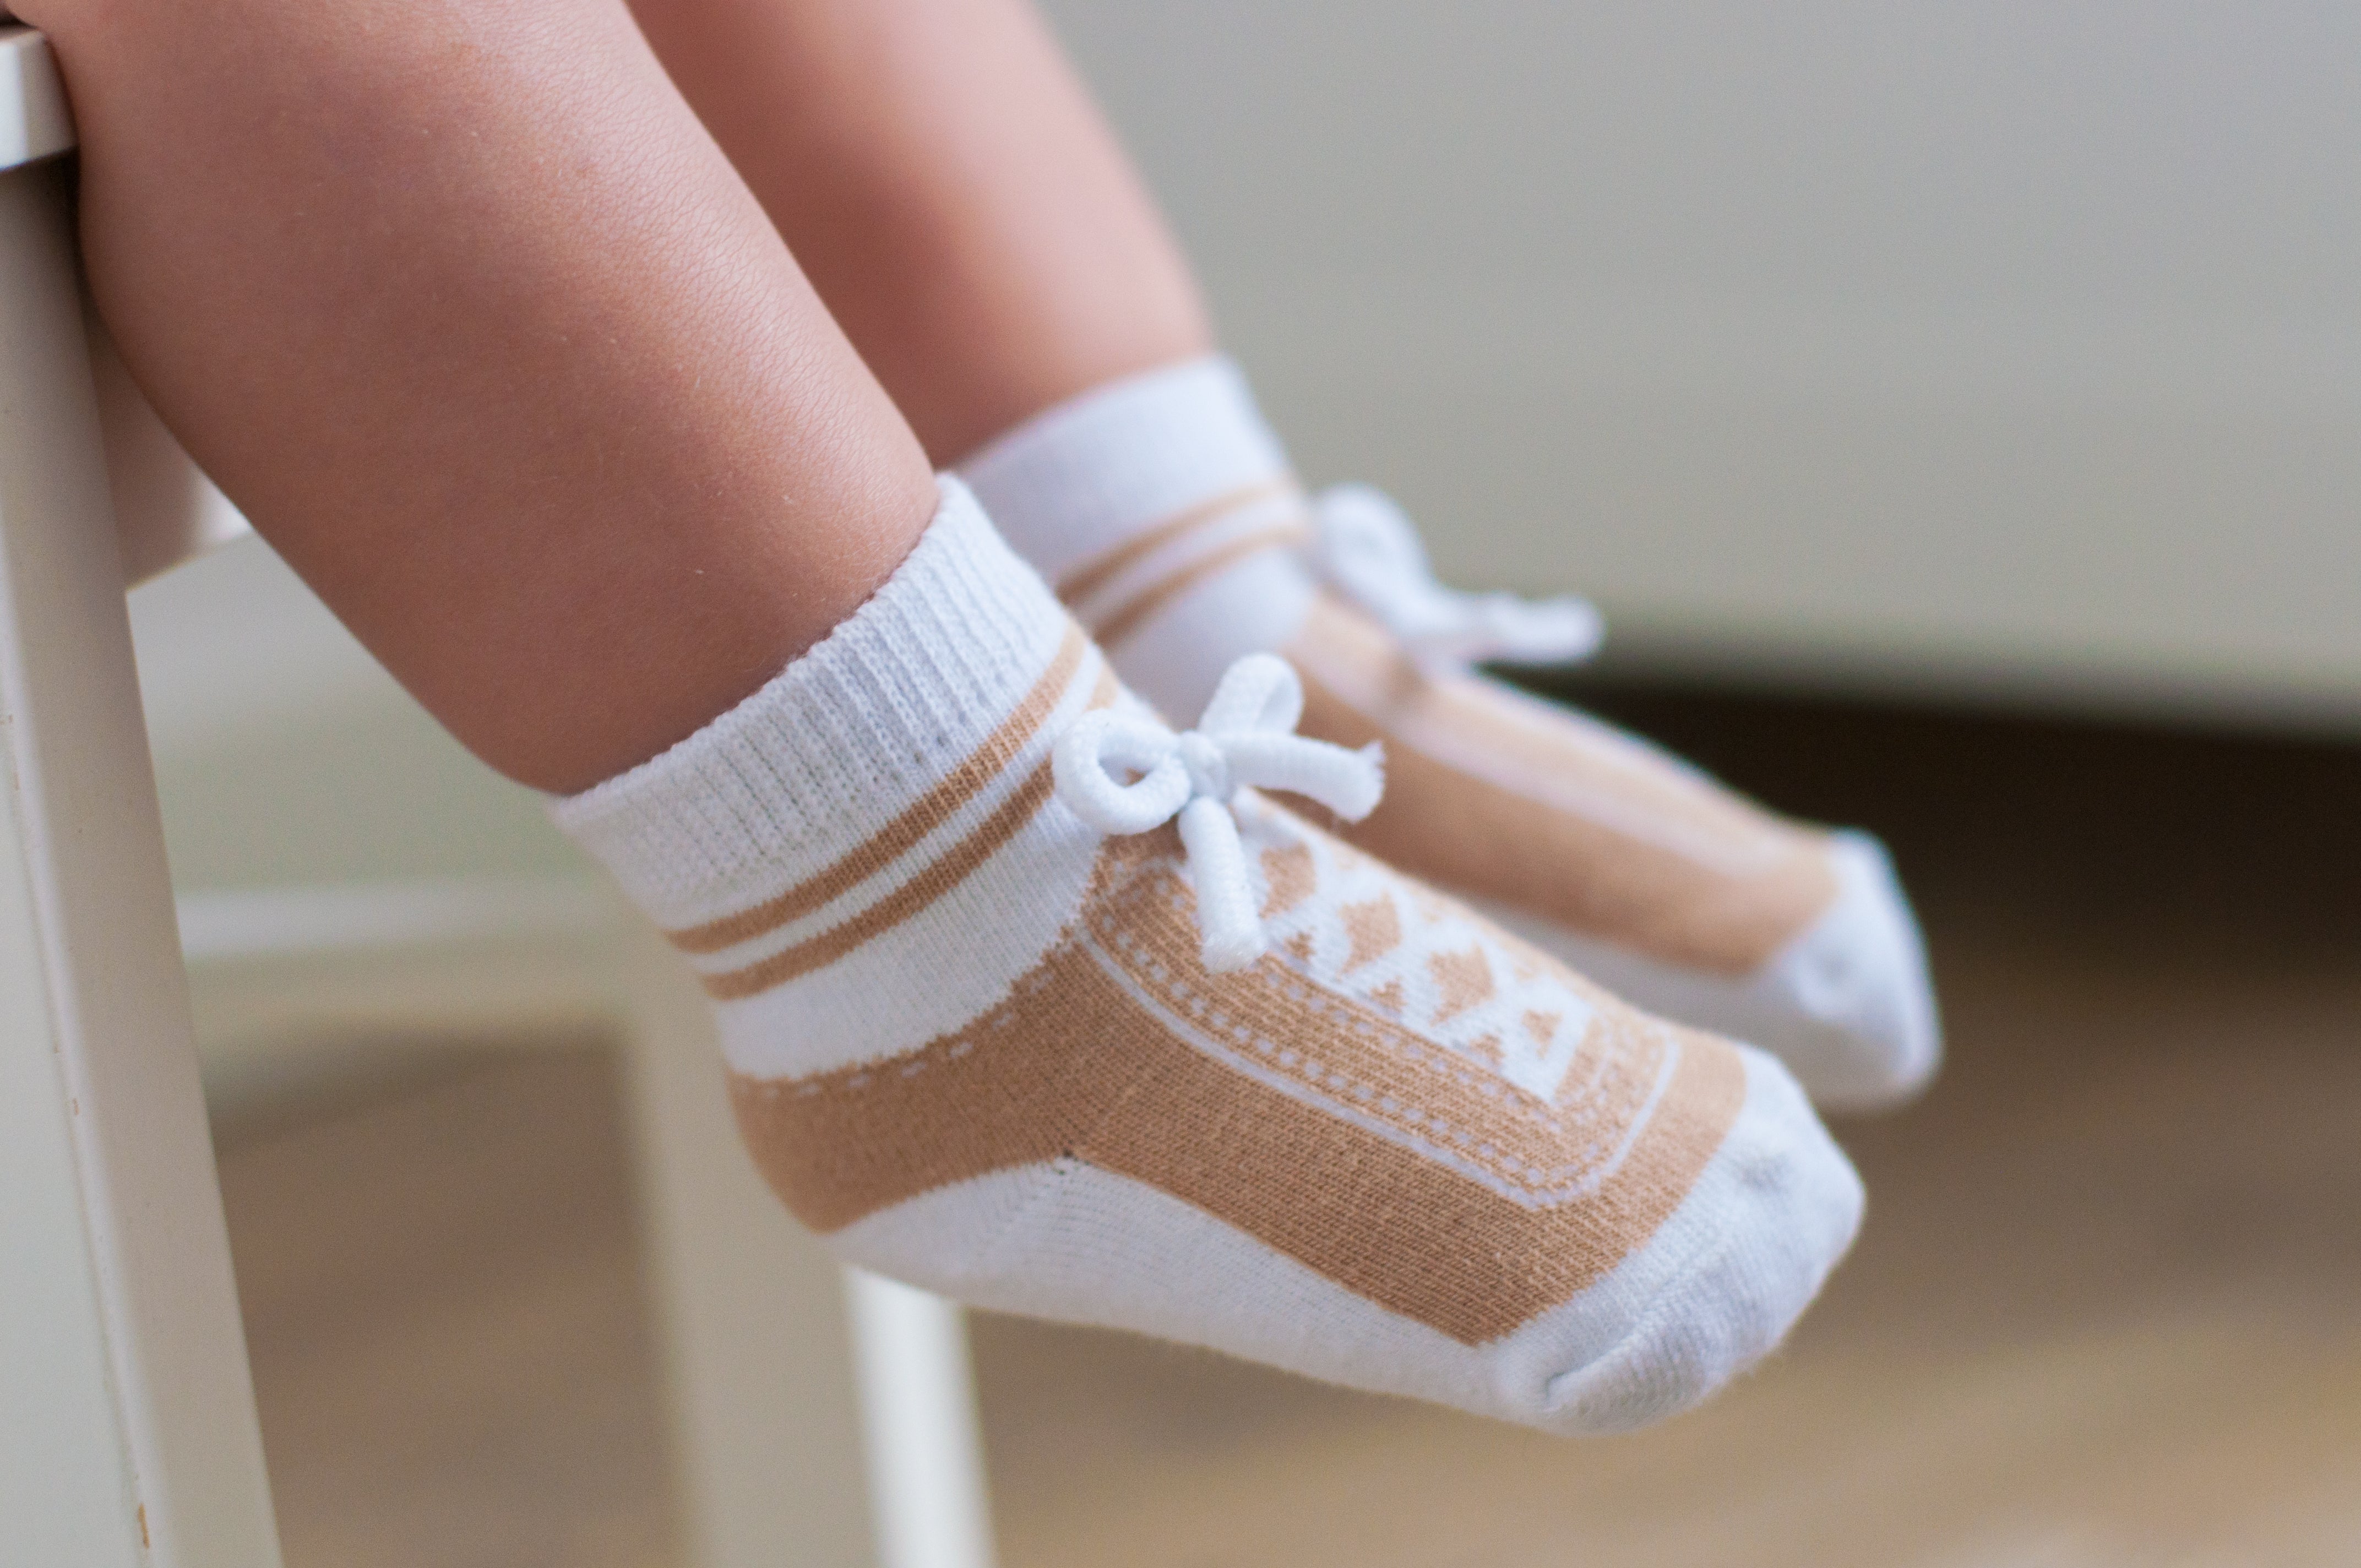 Light brown infant or toddler socks with fake shoelaces look like shoes